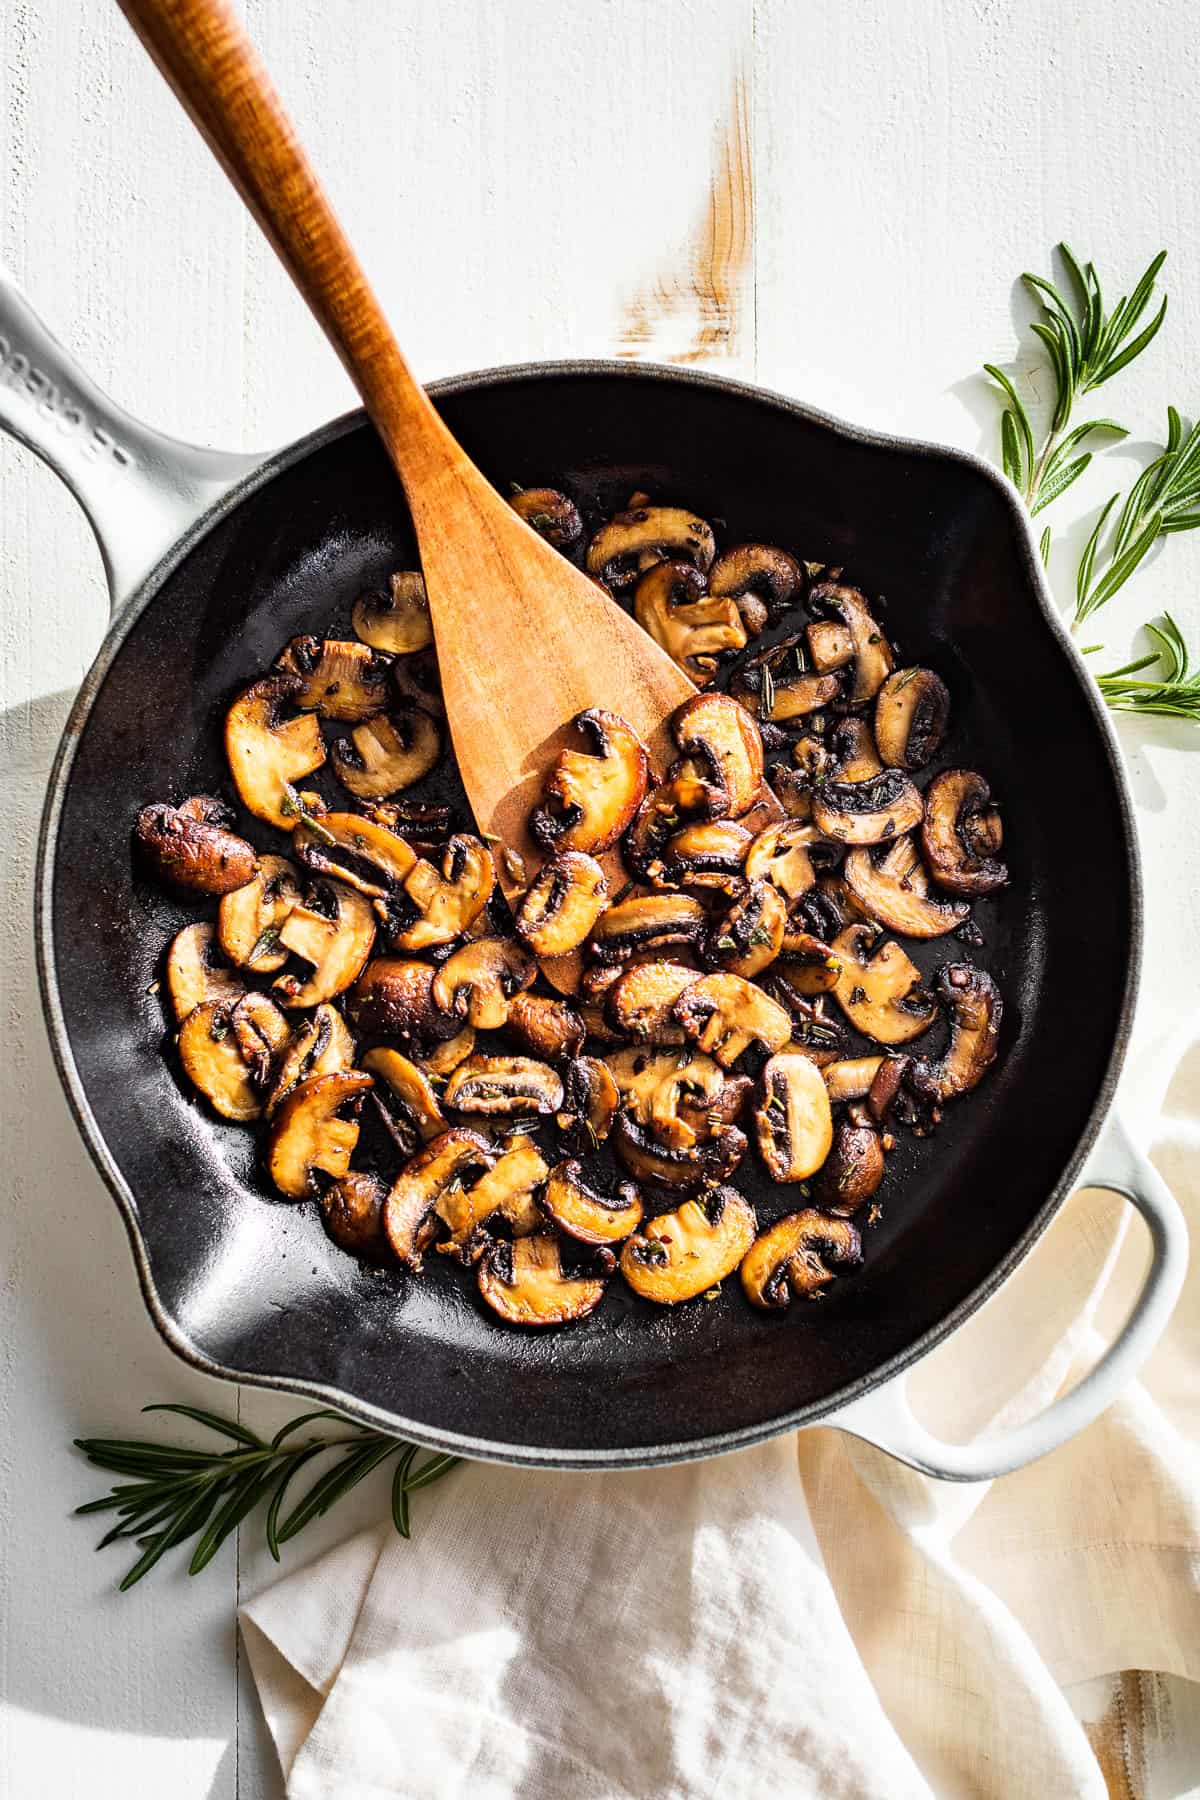 Straight down view of garlic butter mushrooms in a white skillet with a wood spatula and rosemary sprigs on the side.